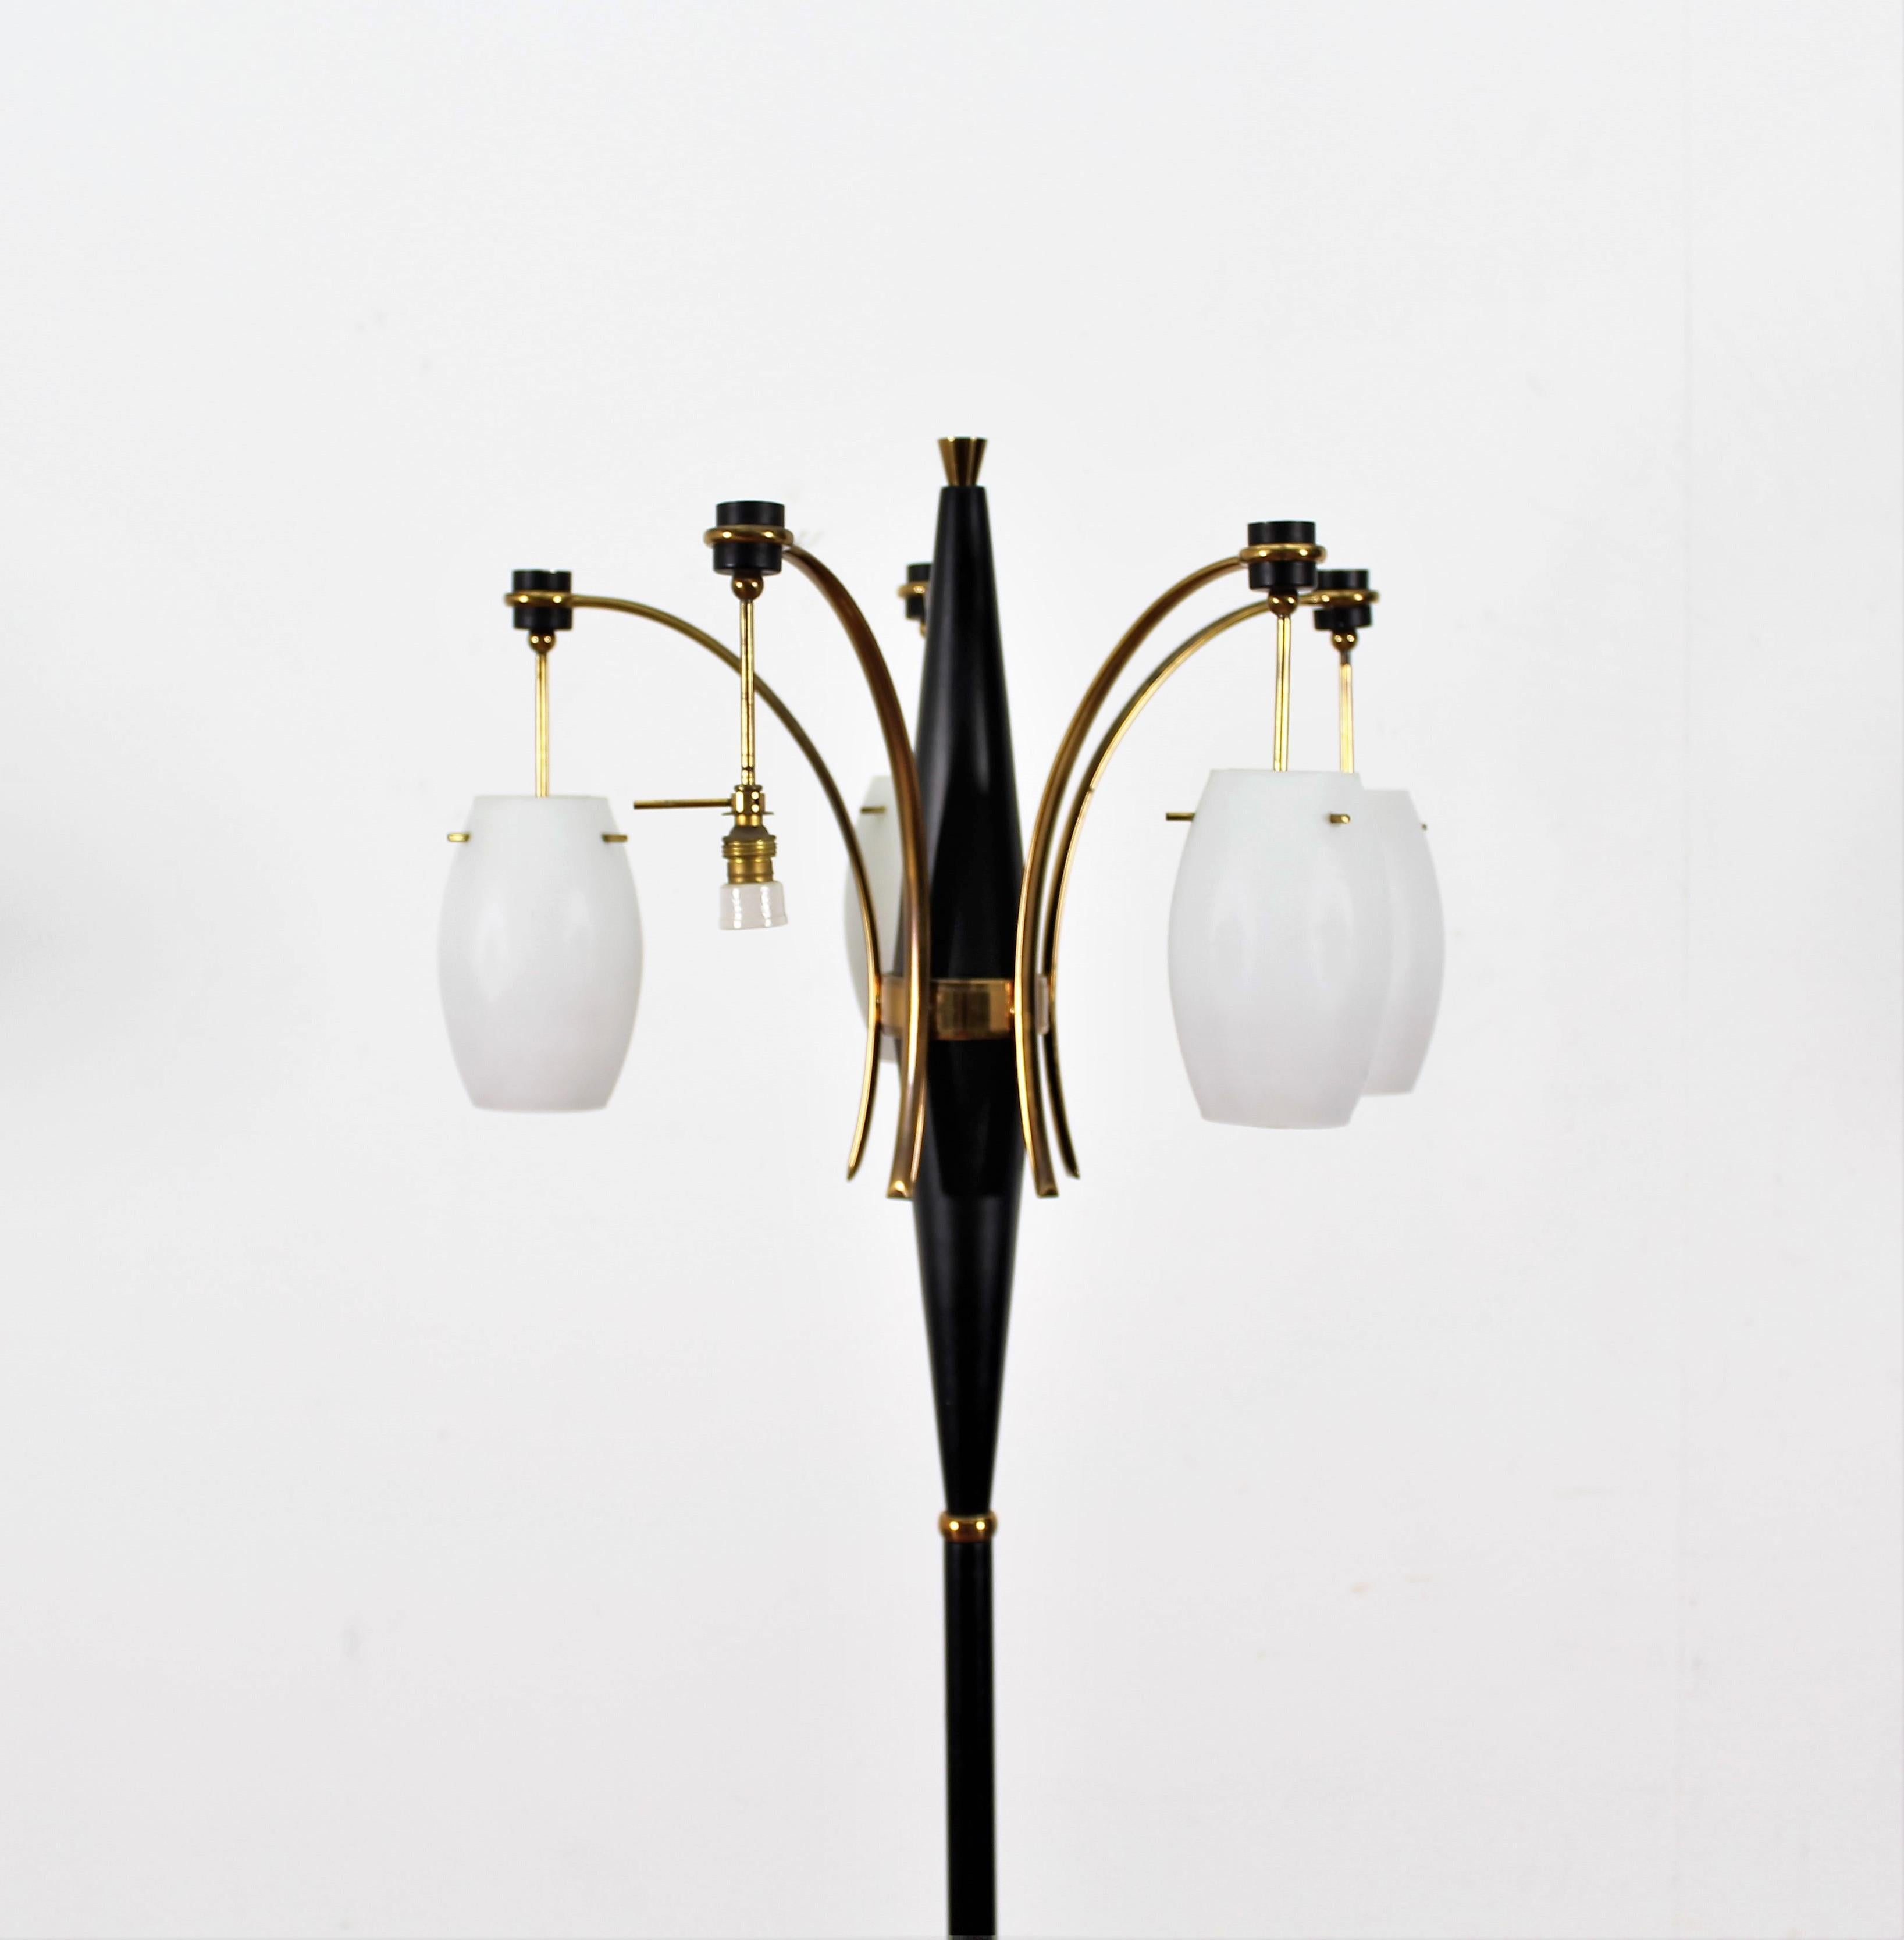 Fine five-light floor lamp in metal and brass, opaline glass with circular marble base, by Stilux Milano, Italy 1960's.
Wear consistent with age and use.